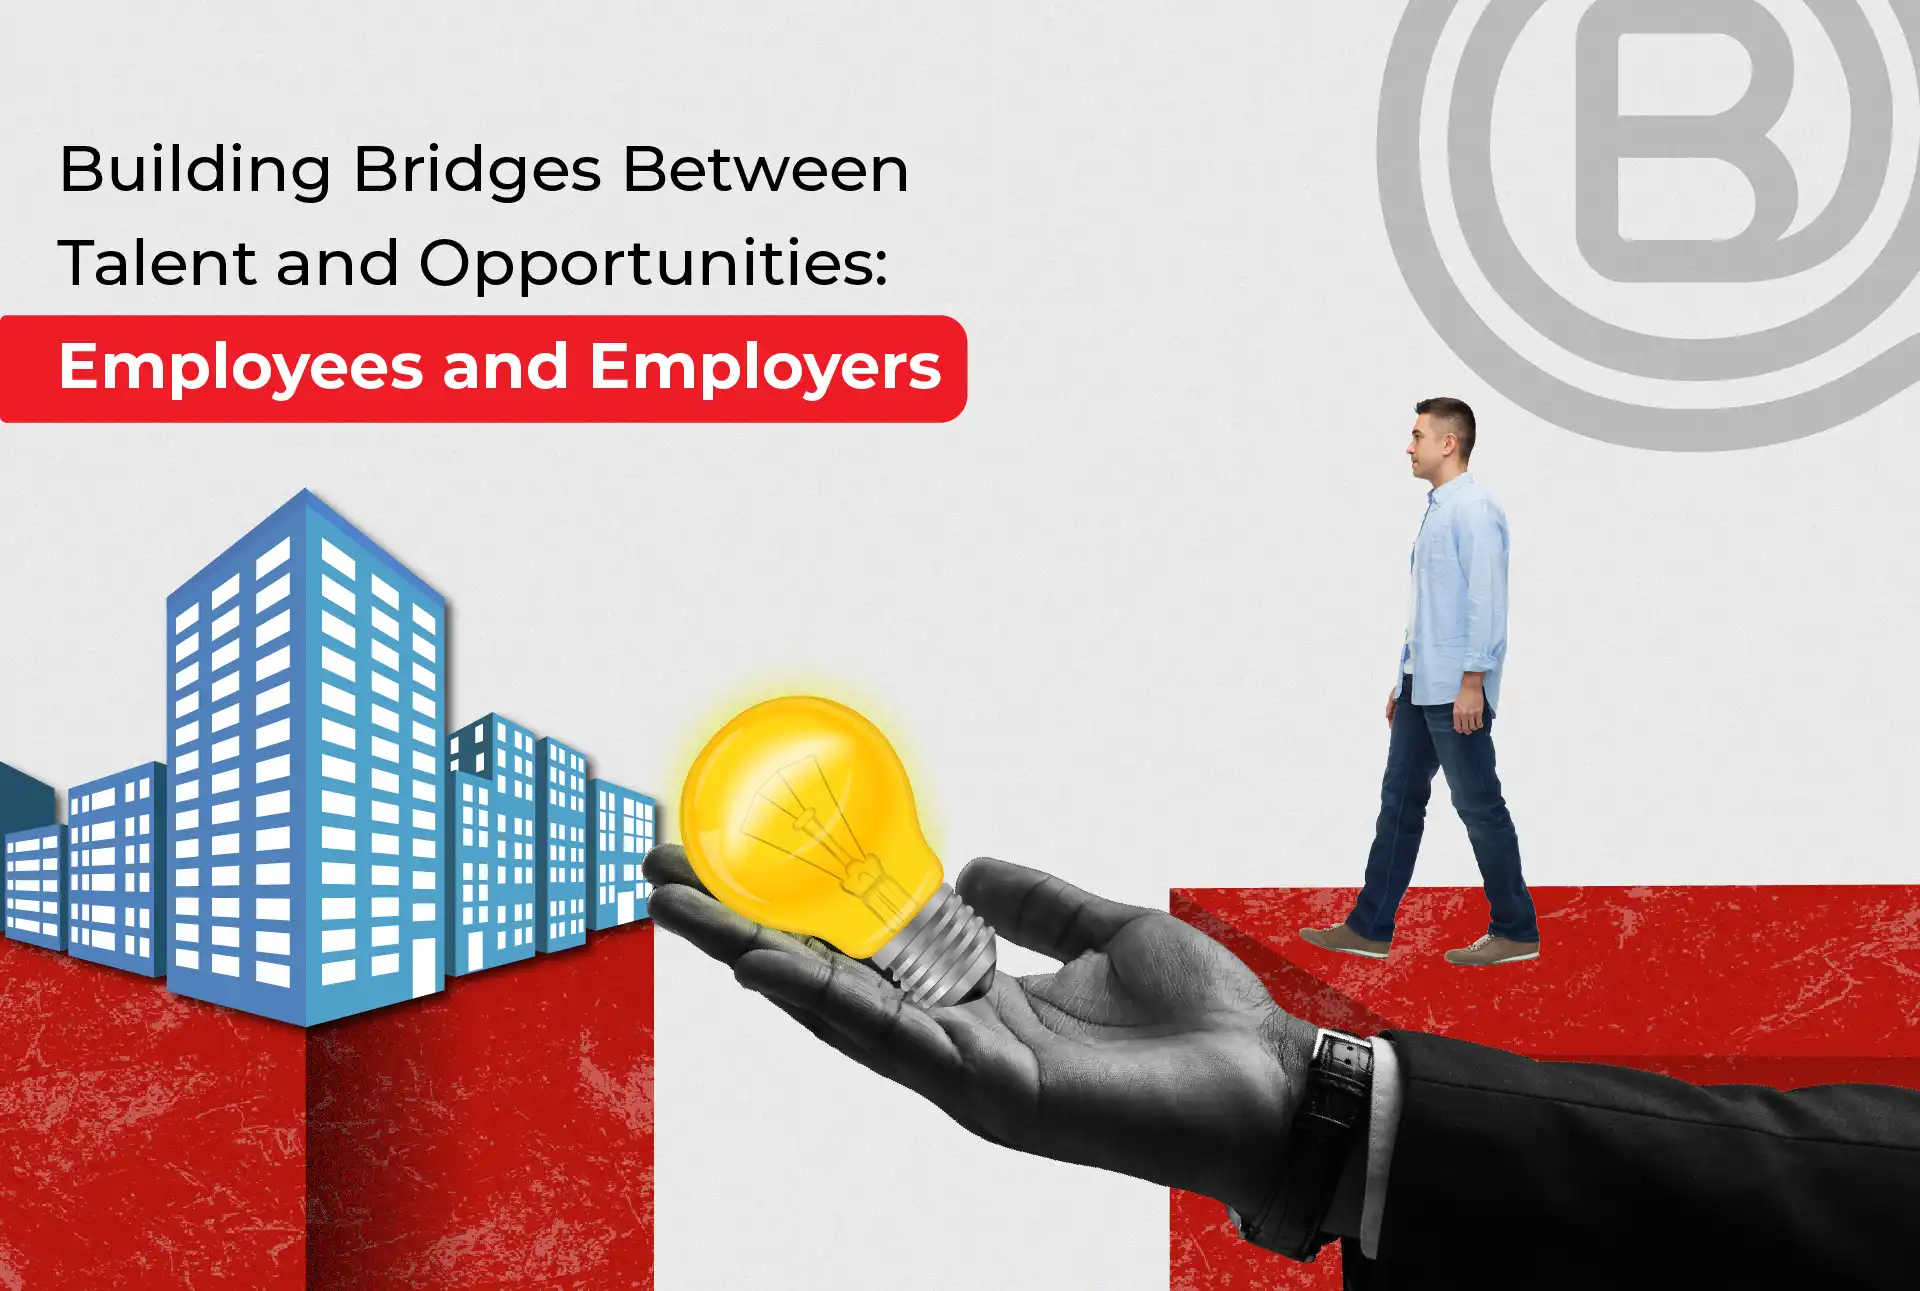 Building Bridges Between Talent and Opportunities: Employees and Employers